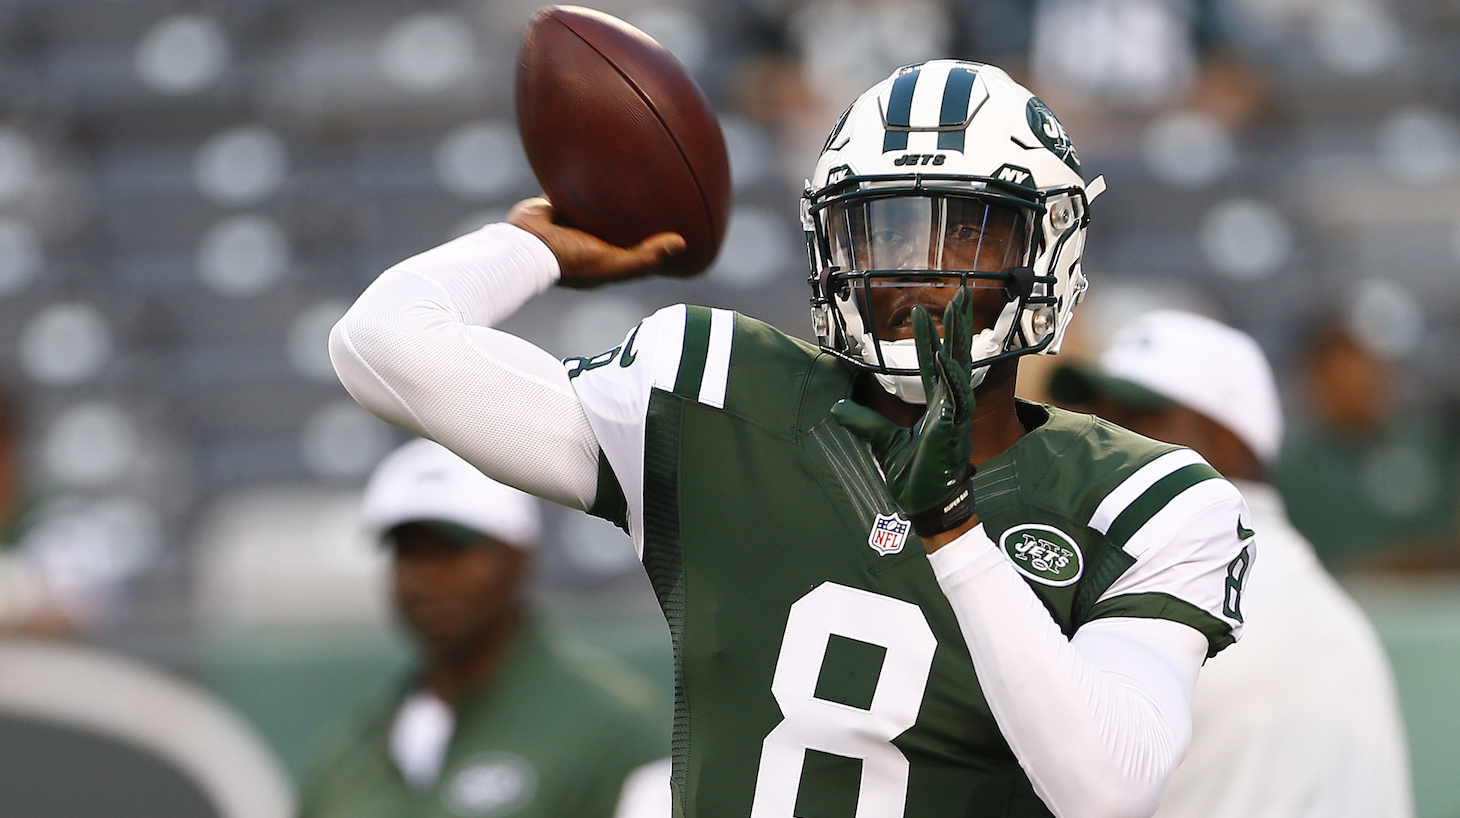 EAST RUTHERFORD, NJ - SEPTEMBER 03: Quarterback Josh Johnson #8 of the New York Jets warms up before a pre-season game against the Philadelphia Eagles at MetLife Stadium on September 3, 2015 in East Rutherford, New Jersey. (Photo by Rich Schultz /Getty Images)